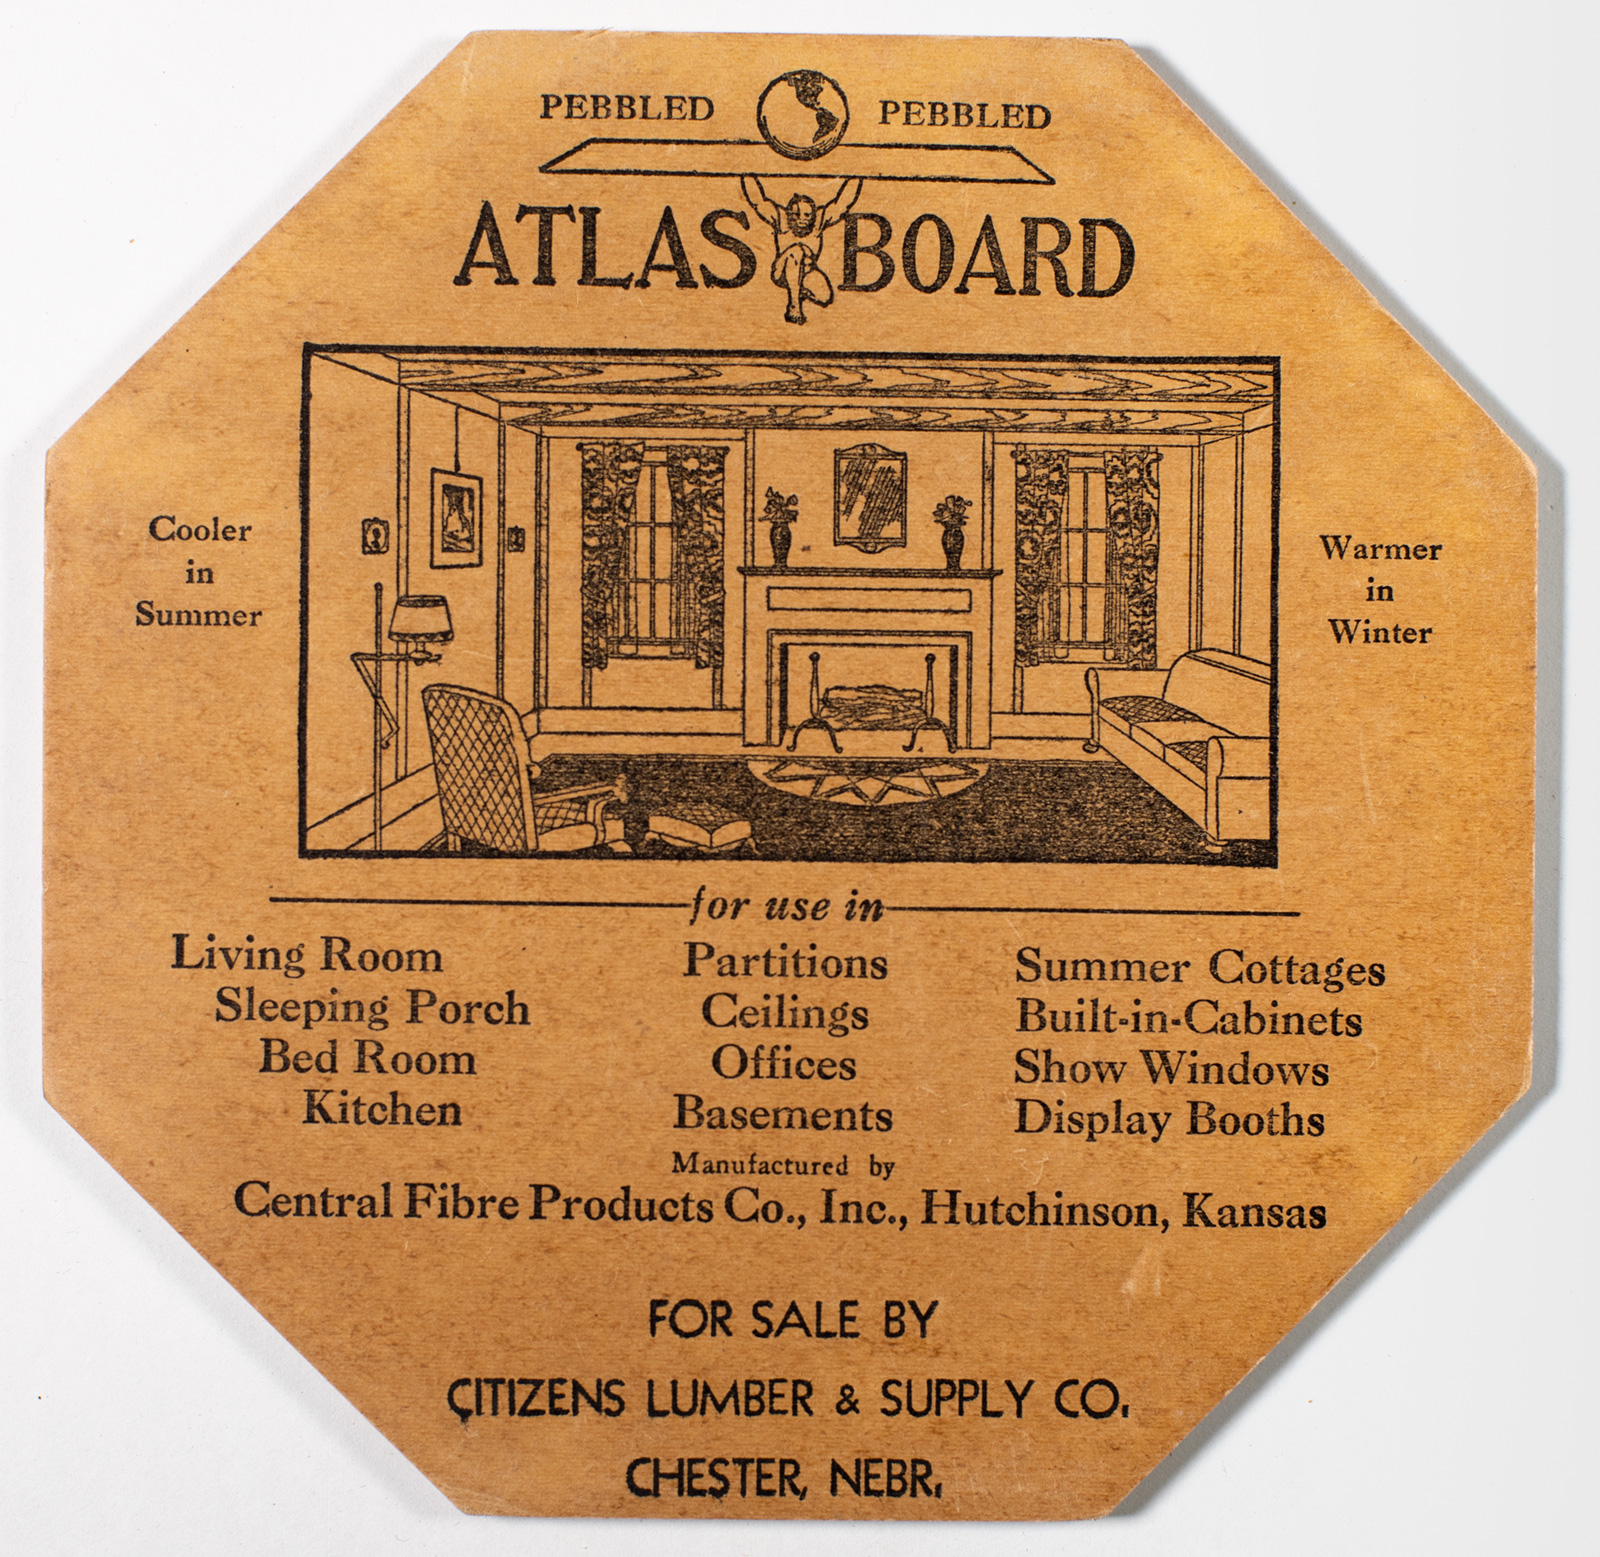 Atlas Board Sample Piece from Citizens Lumber main image